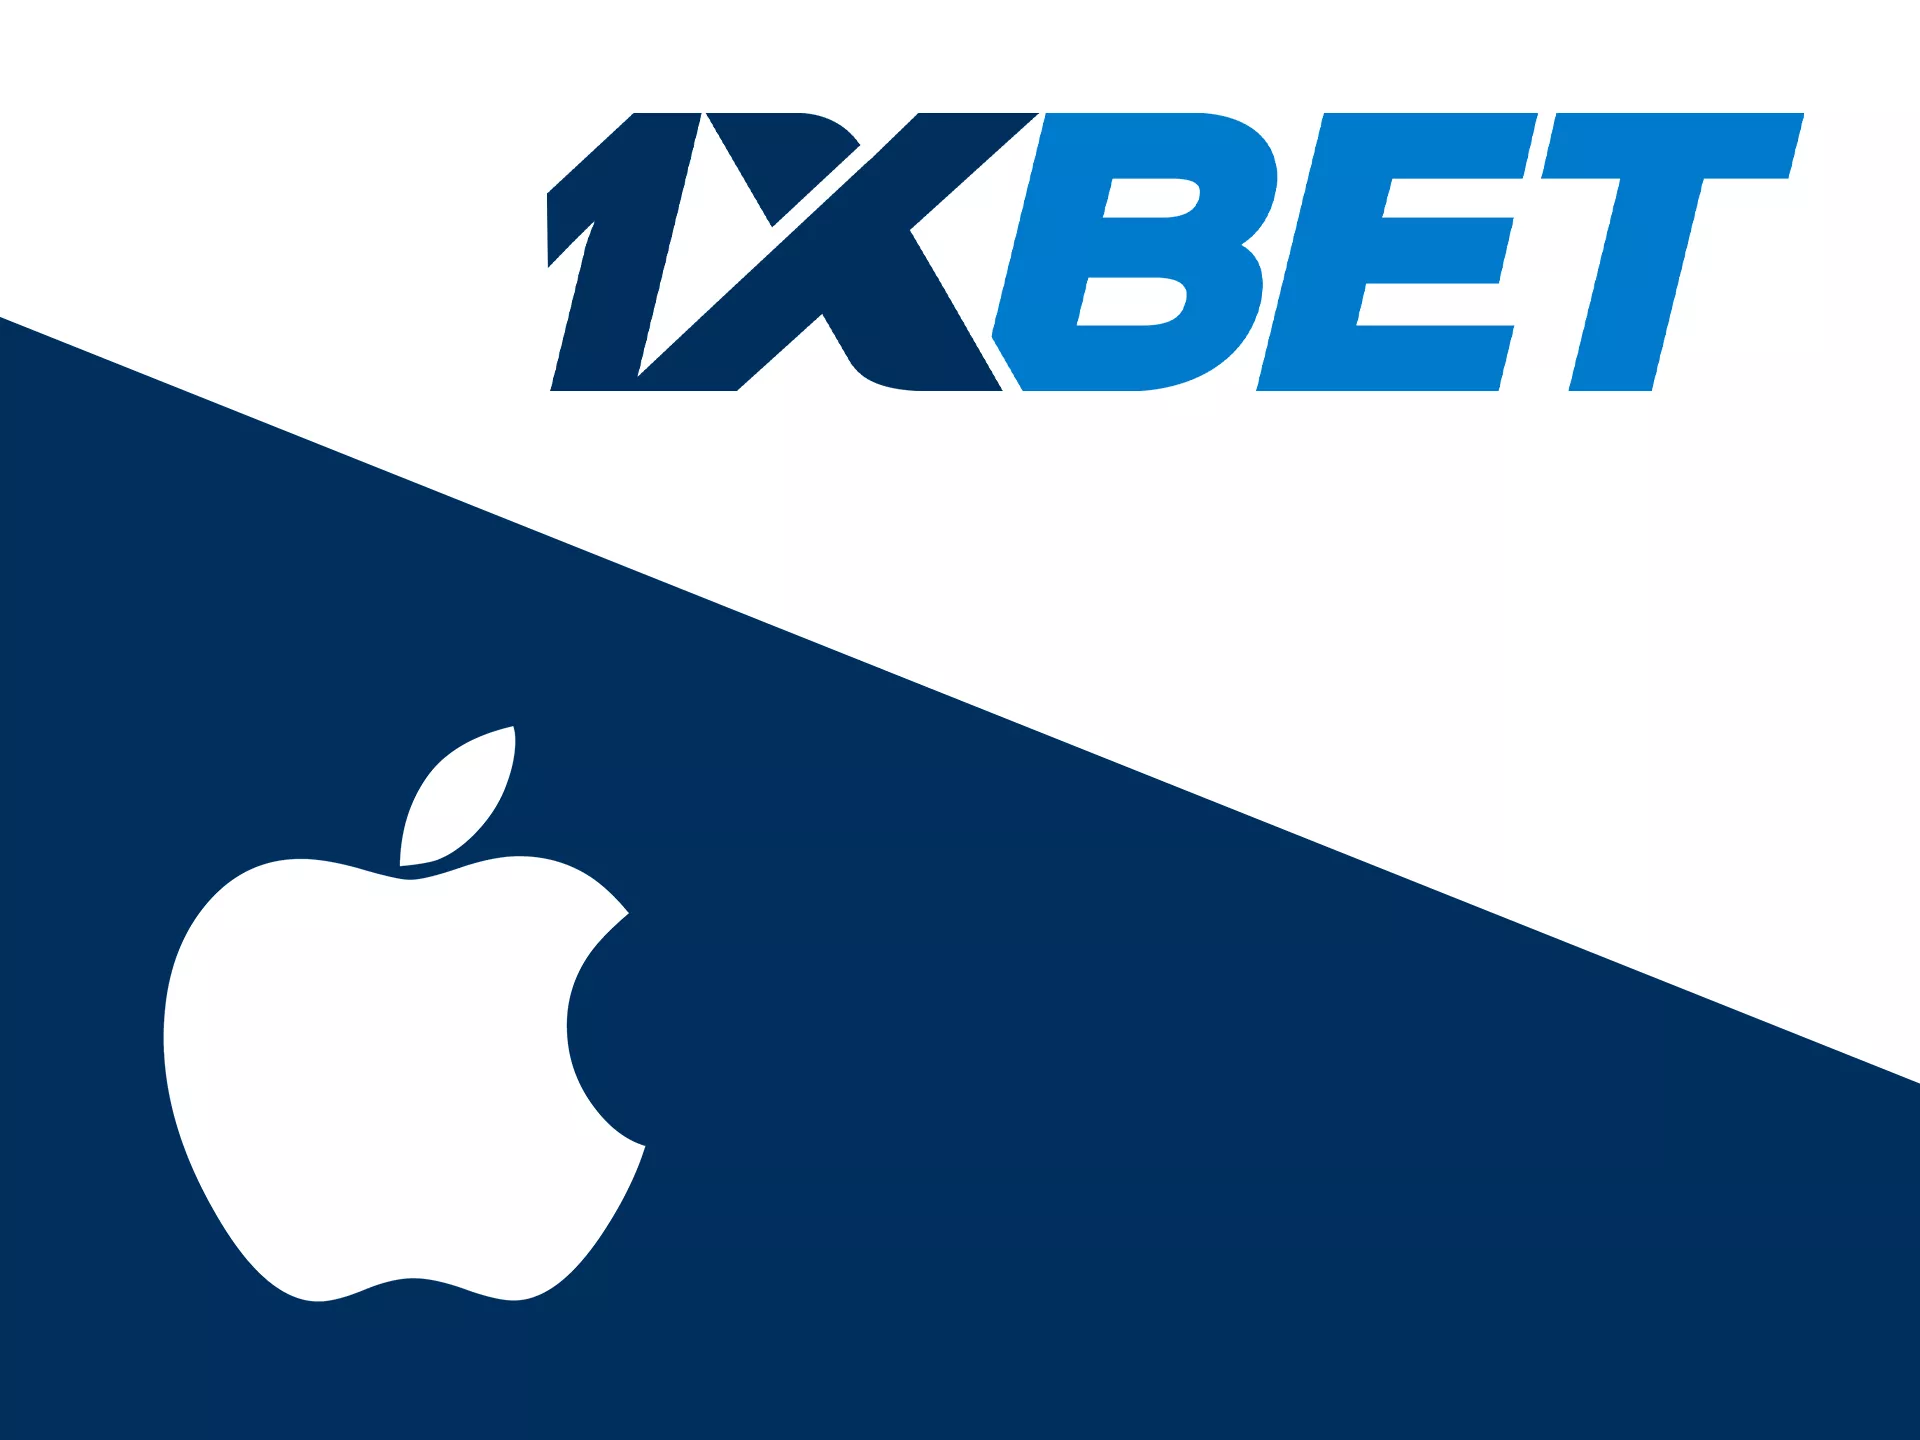 Iphone owners can install the 1xbet app on their devices too.